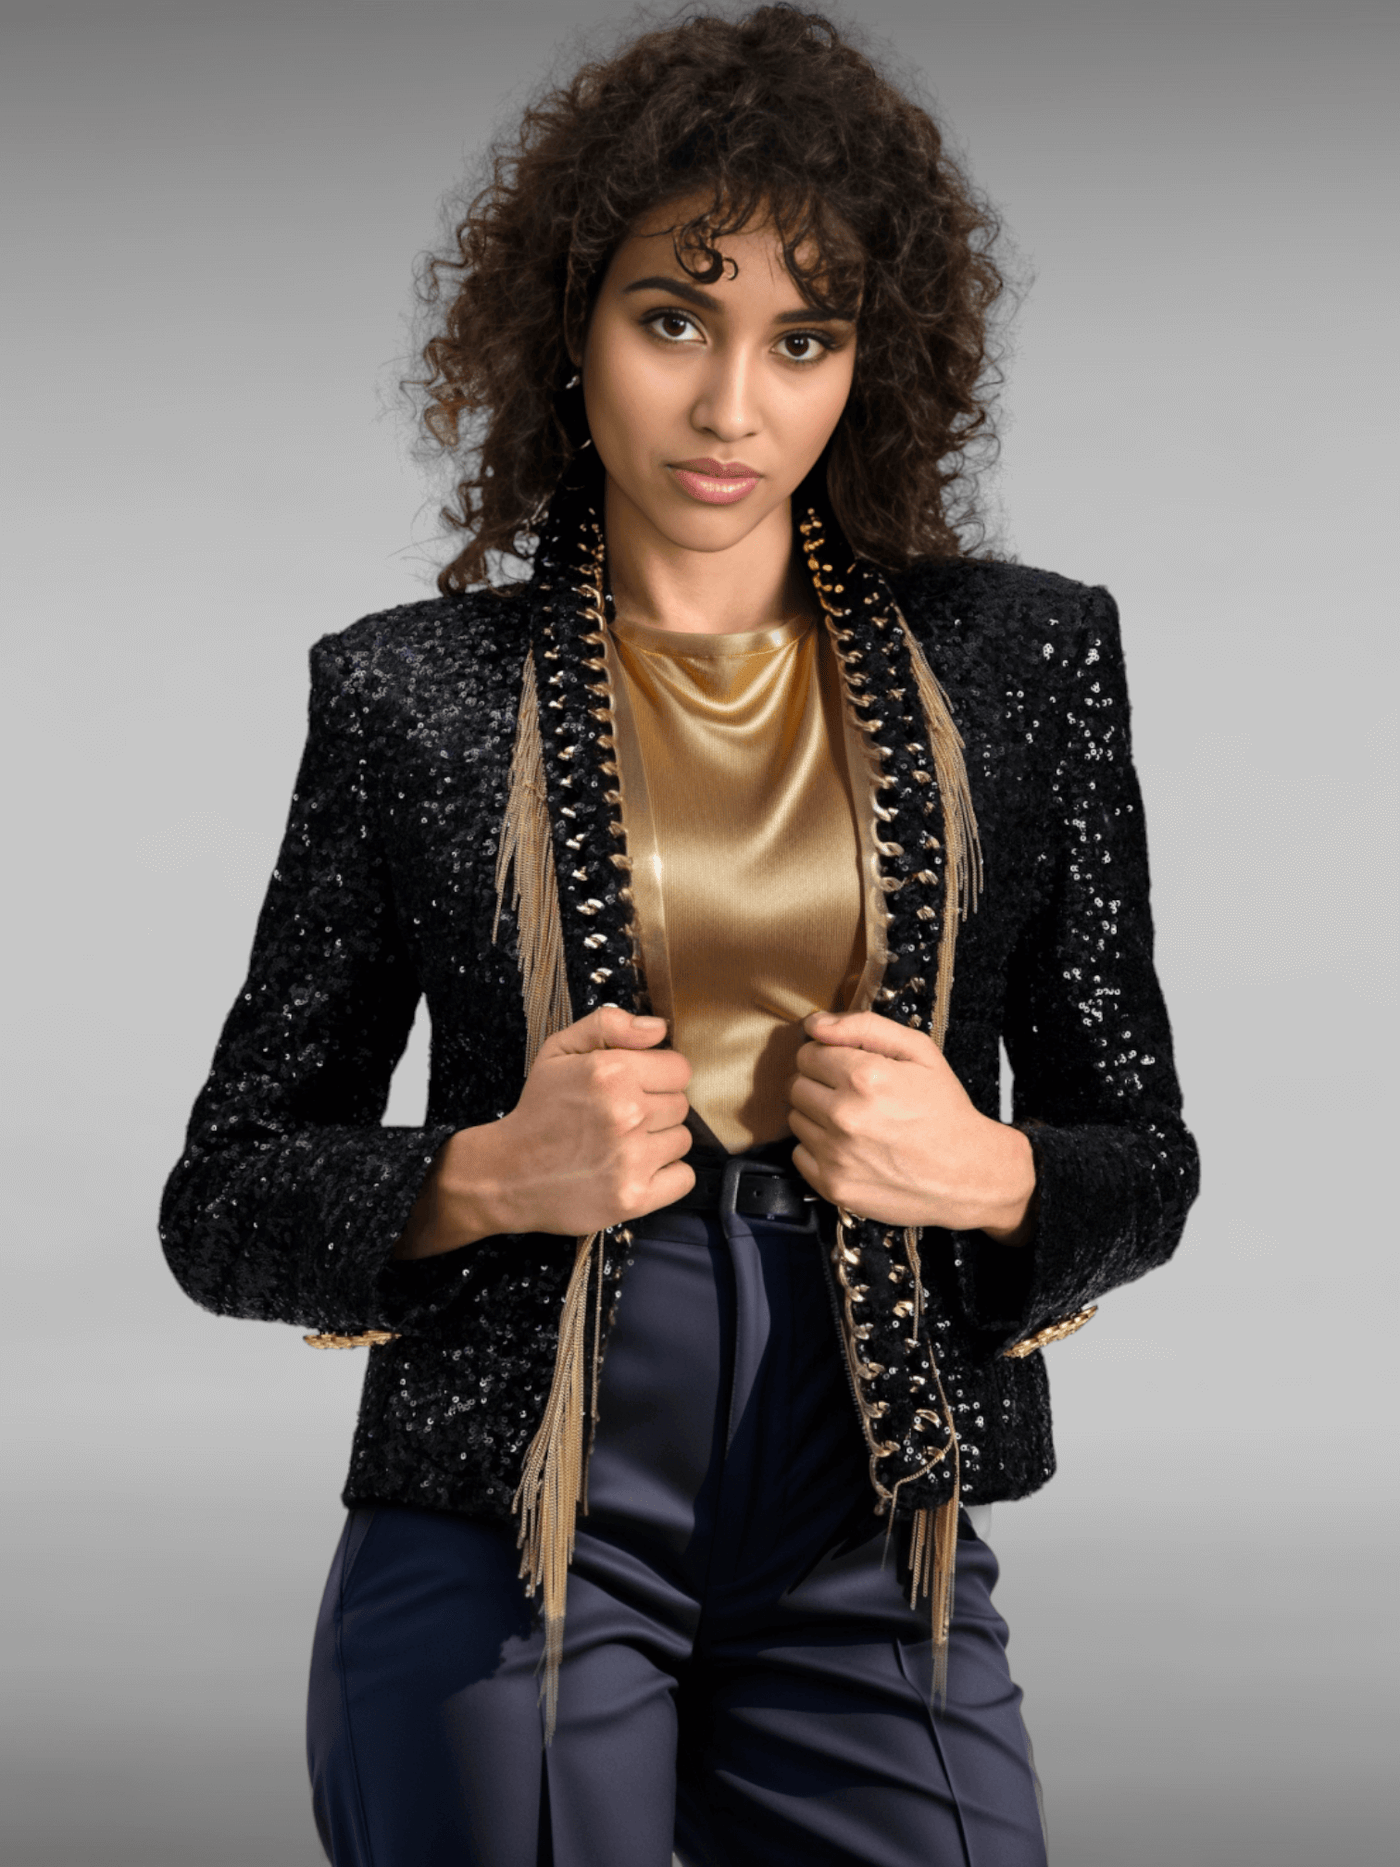 Long Sleeve Sequin Chain Tassel Jacket: Sparkling Statement Piece for Glamorous Nights